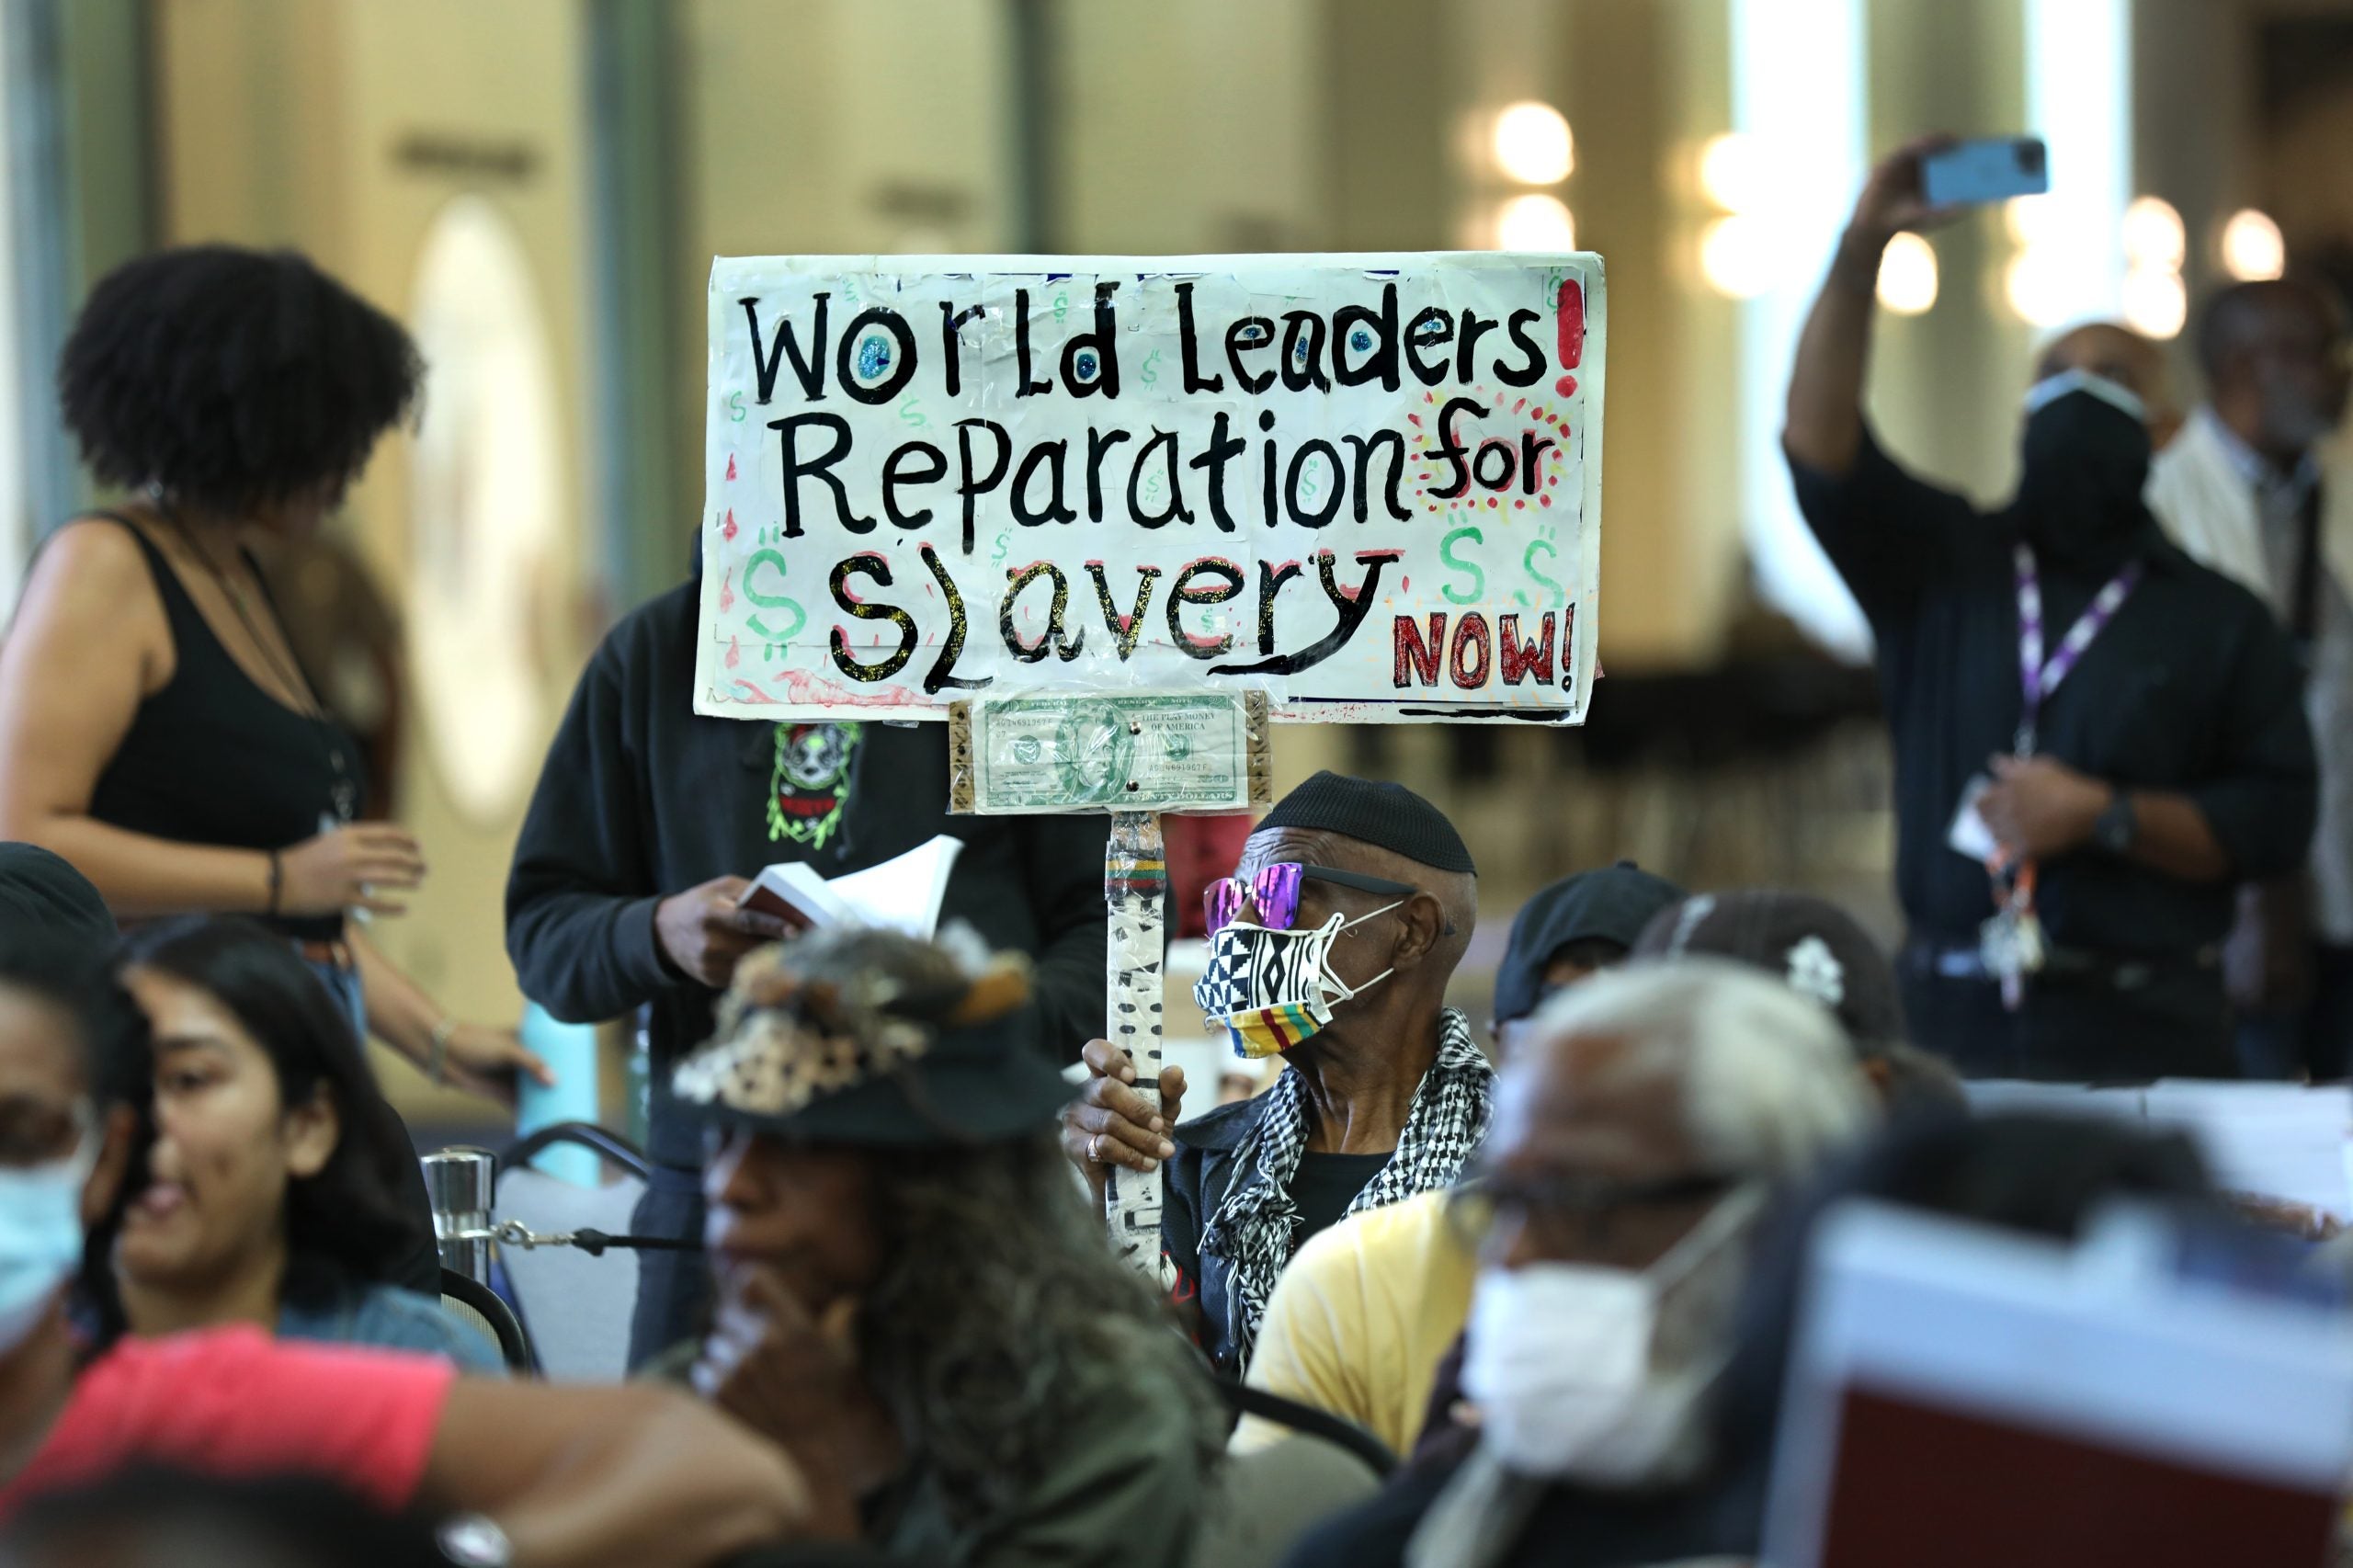 California Announces Reparations Plan…To Mixed Reviews